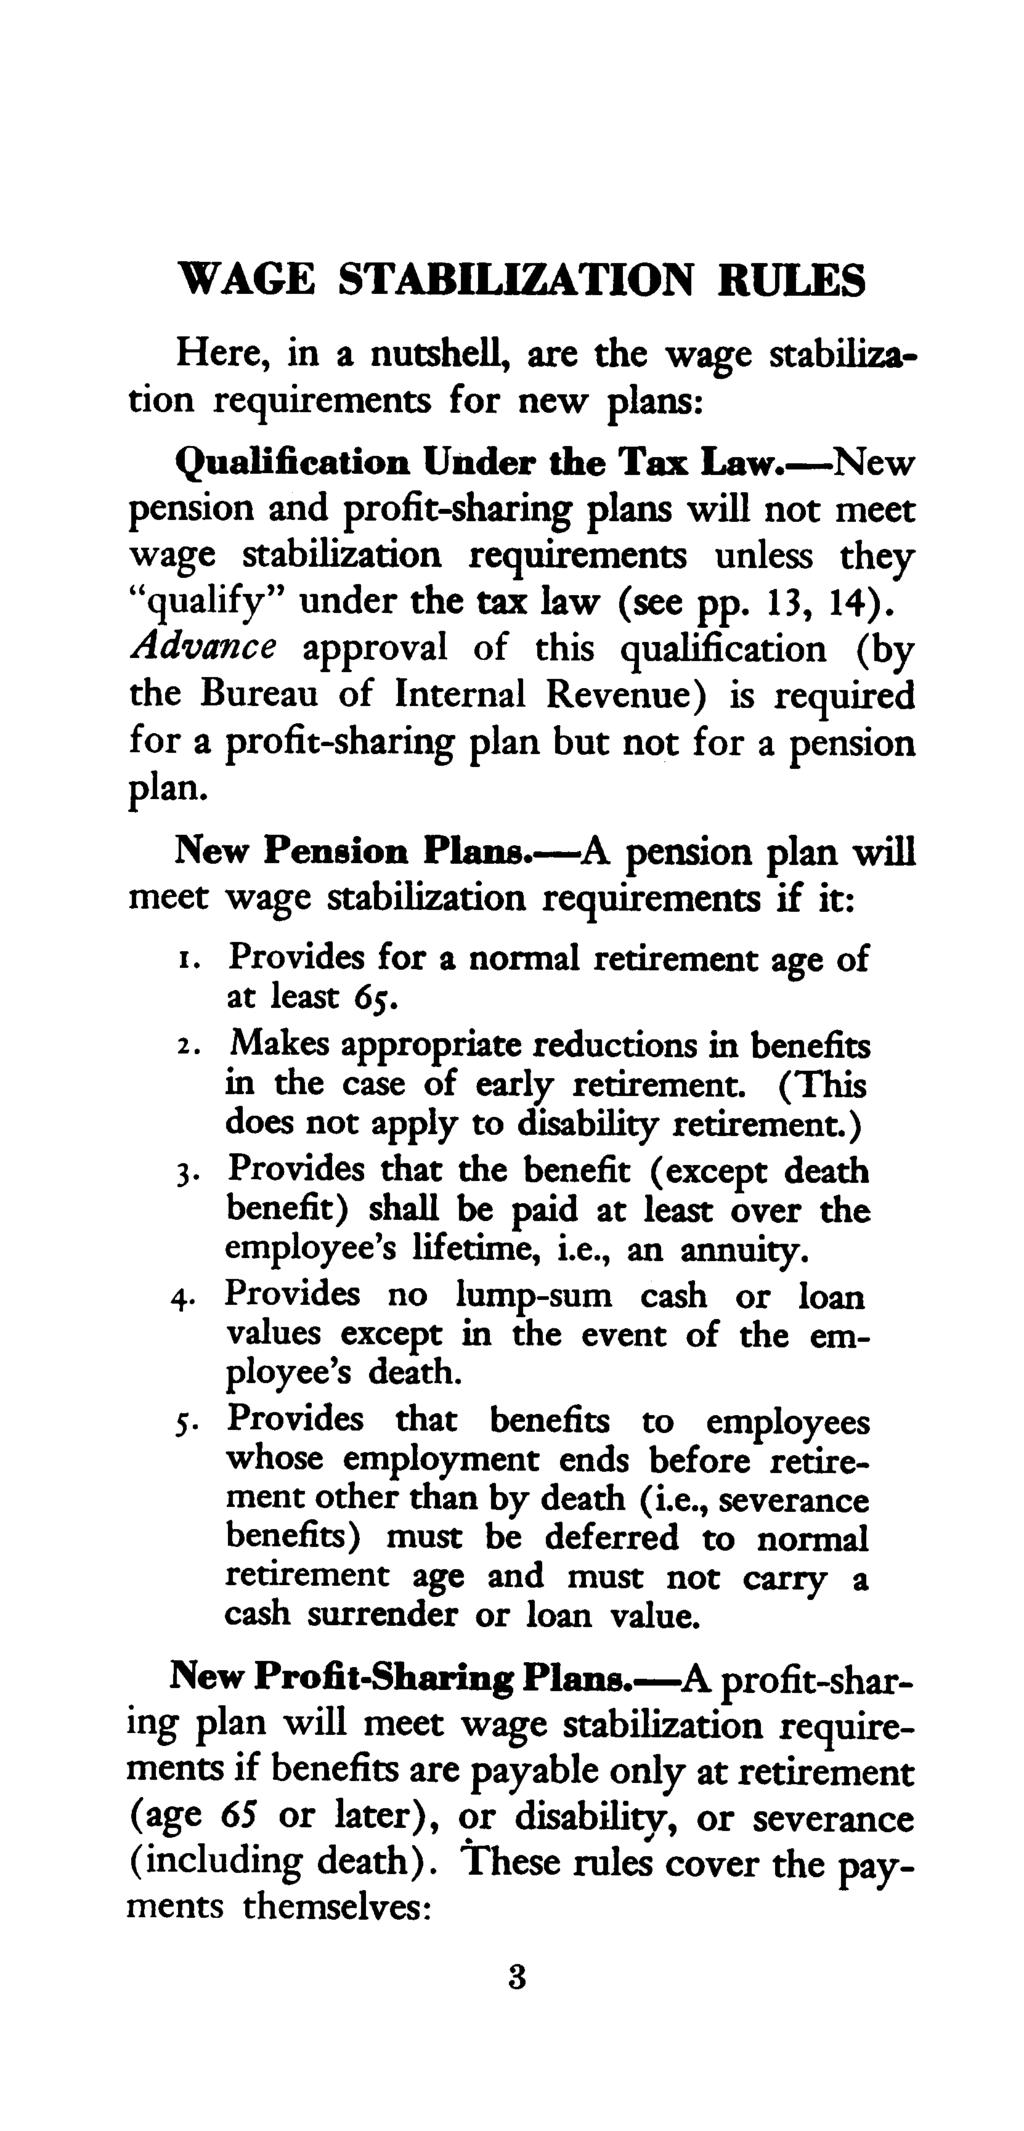 WAGE STABILIZATION RULES Here, in a nutshell, are the wage stabilization requirements for new plans: Qualification Under the Tax Law.